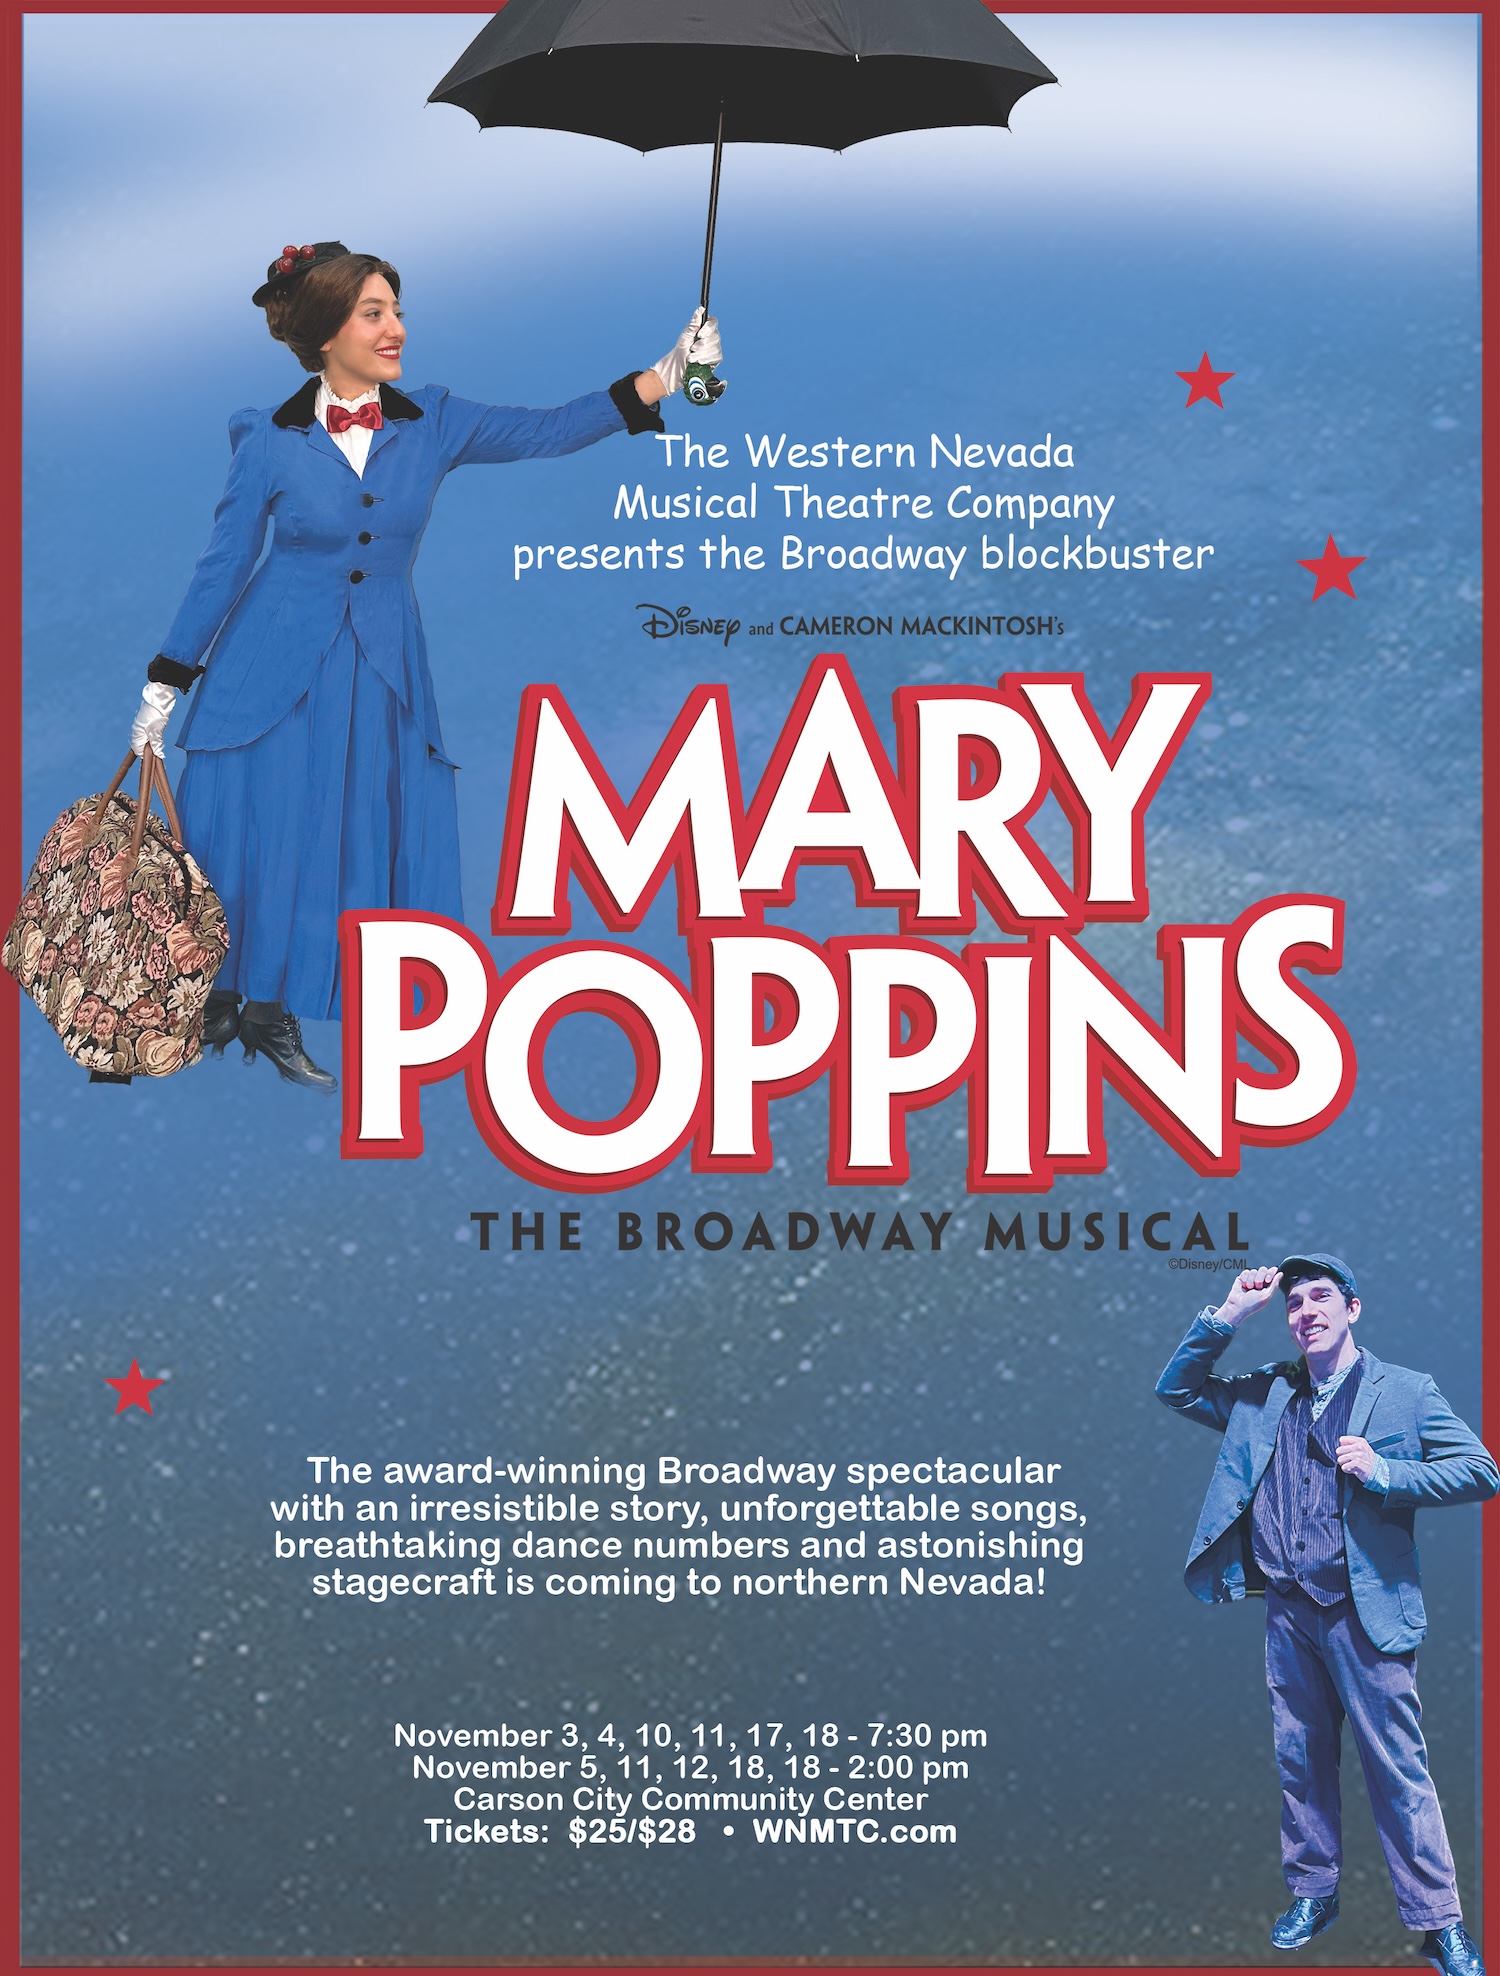 Purchase tickets to see "Mary Poppins" by visiting wnmtc.com.